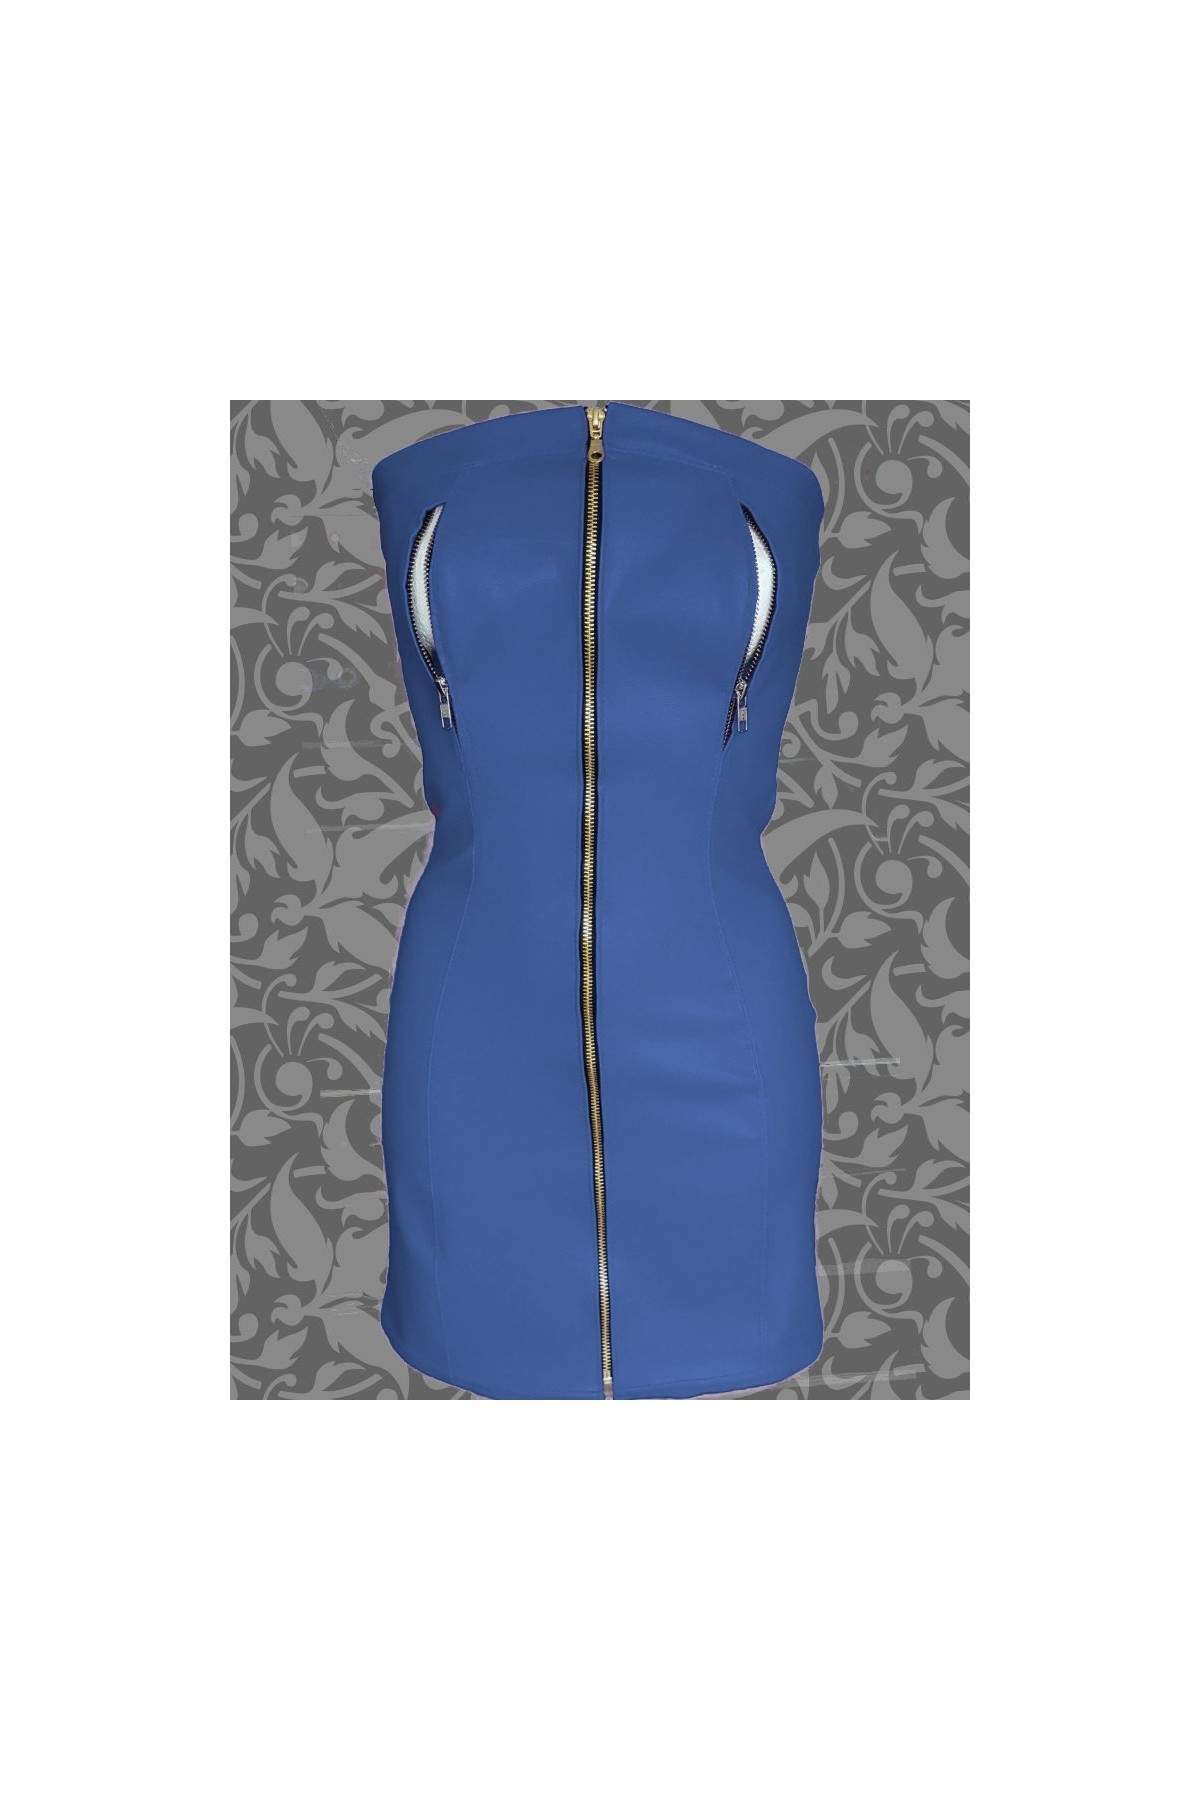 black week Save 15% Nipple-free soft leather dress blue with zippers - 